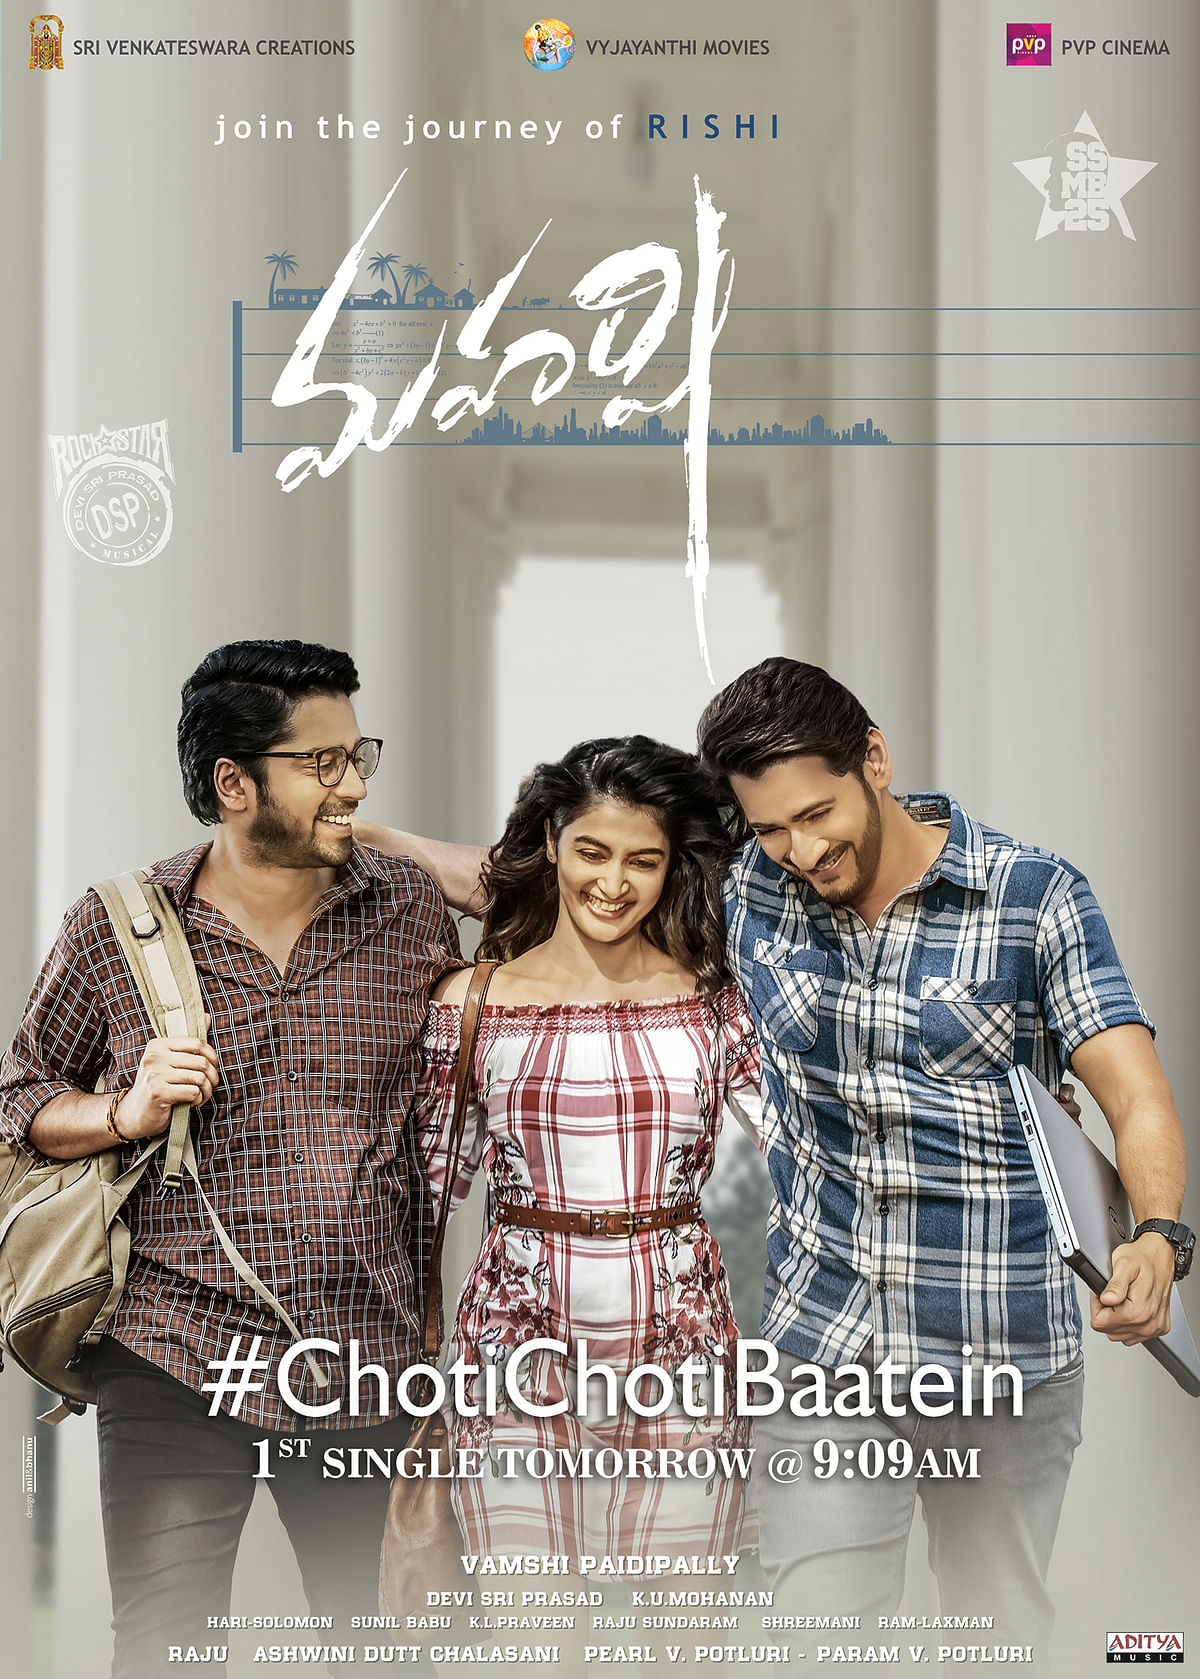 Maharshi (2019) | Featuring Mahesh Babu-Pooja Hegde in the lead, Maharshi collected around Rs 175 crore worldwide and hit the right notes with its solid presentation. Credit: IMDb